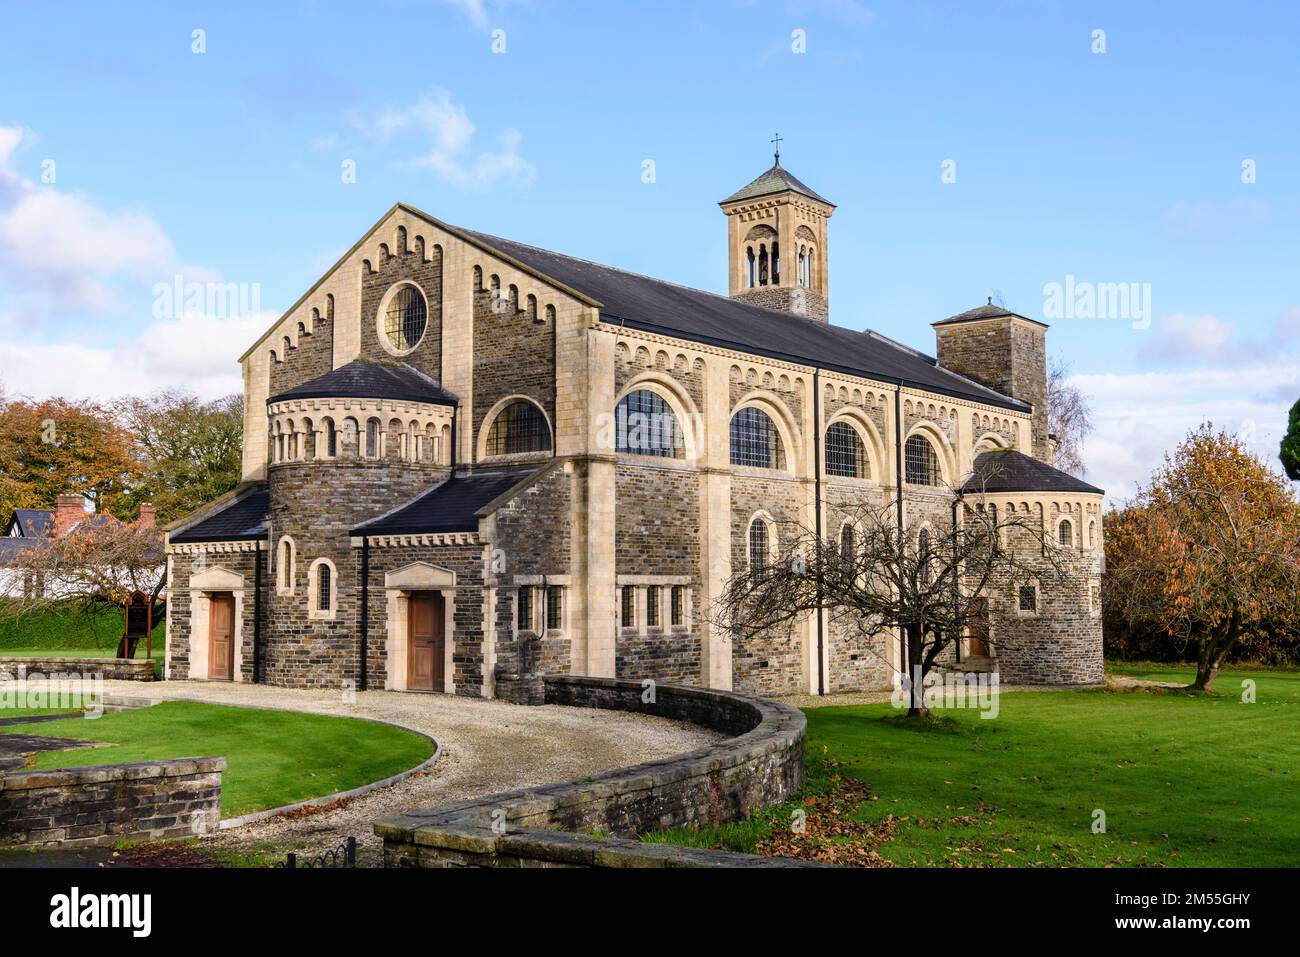 Church of the Good Shepherd, a Church of Ireland building built in Byzantine style, Sion Mills, Northern Ireland, United Kingdom, UK Stock Photo